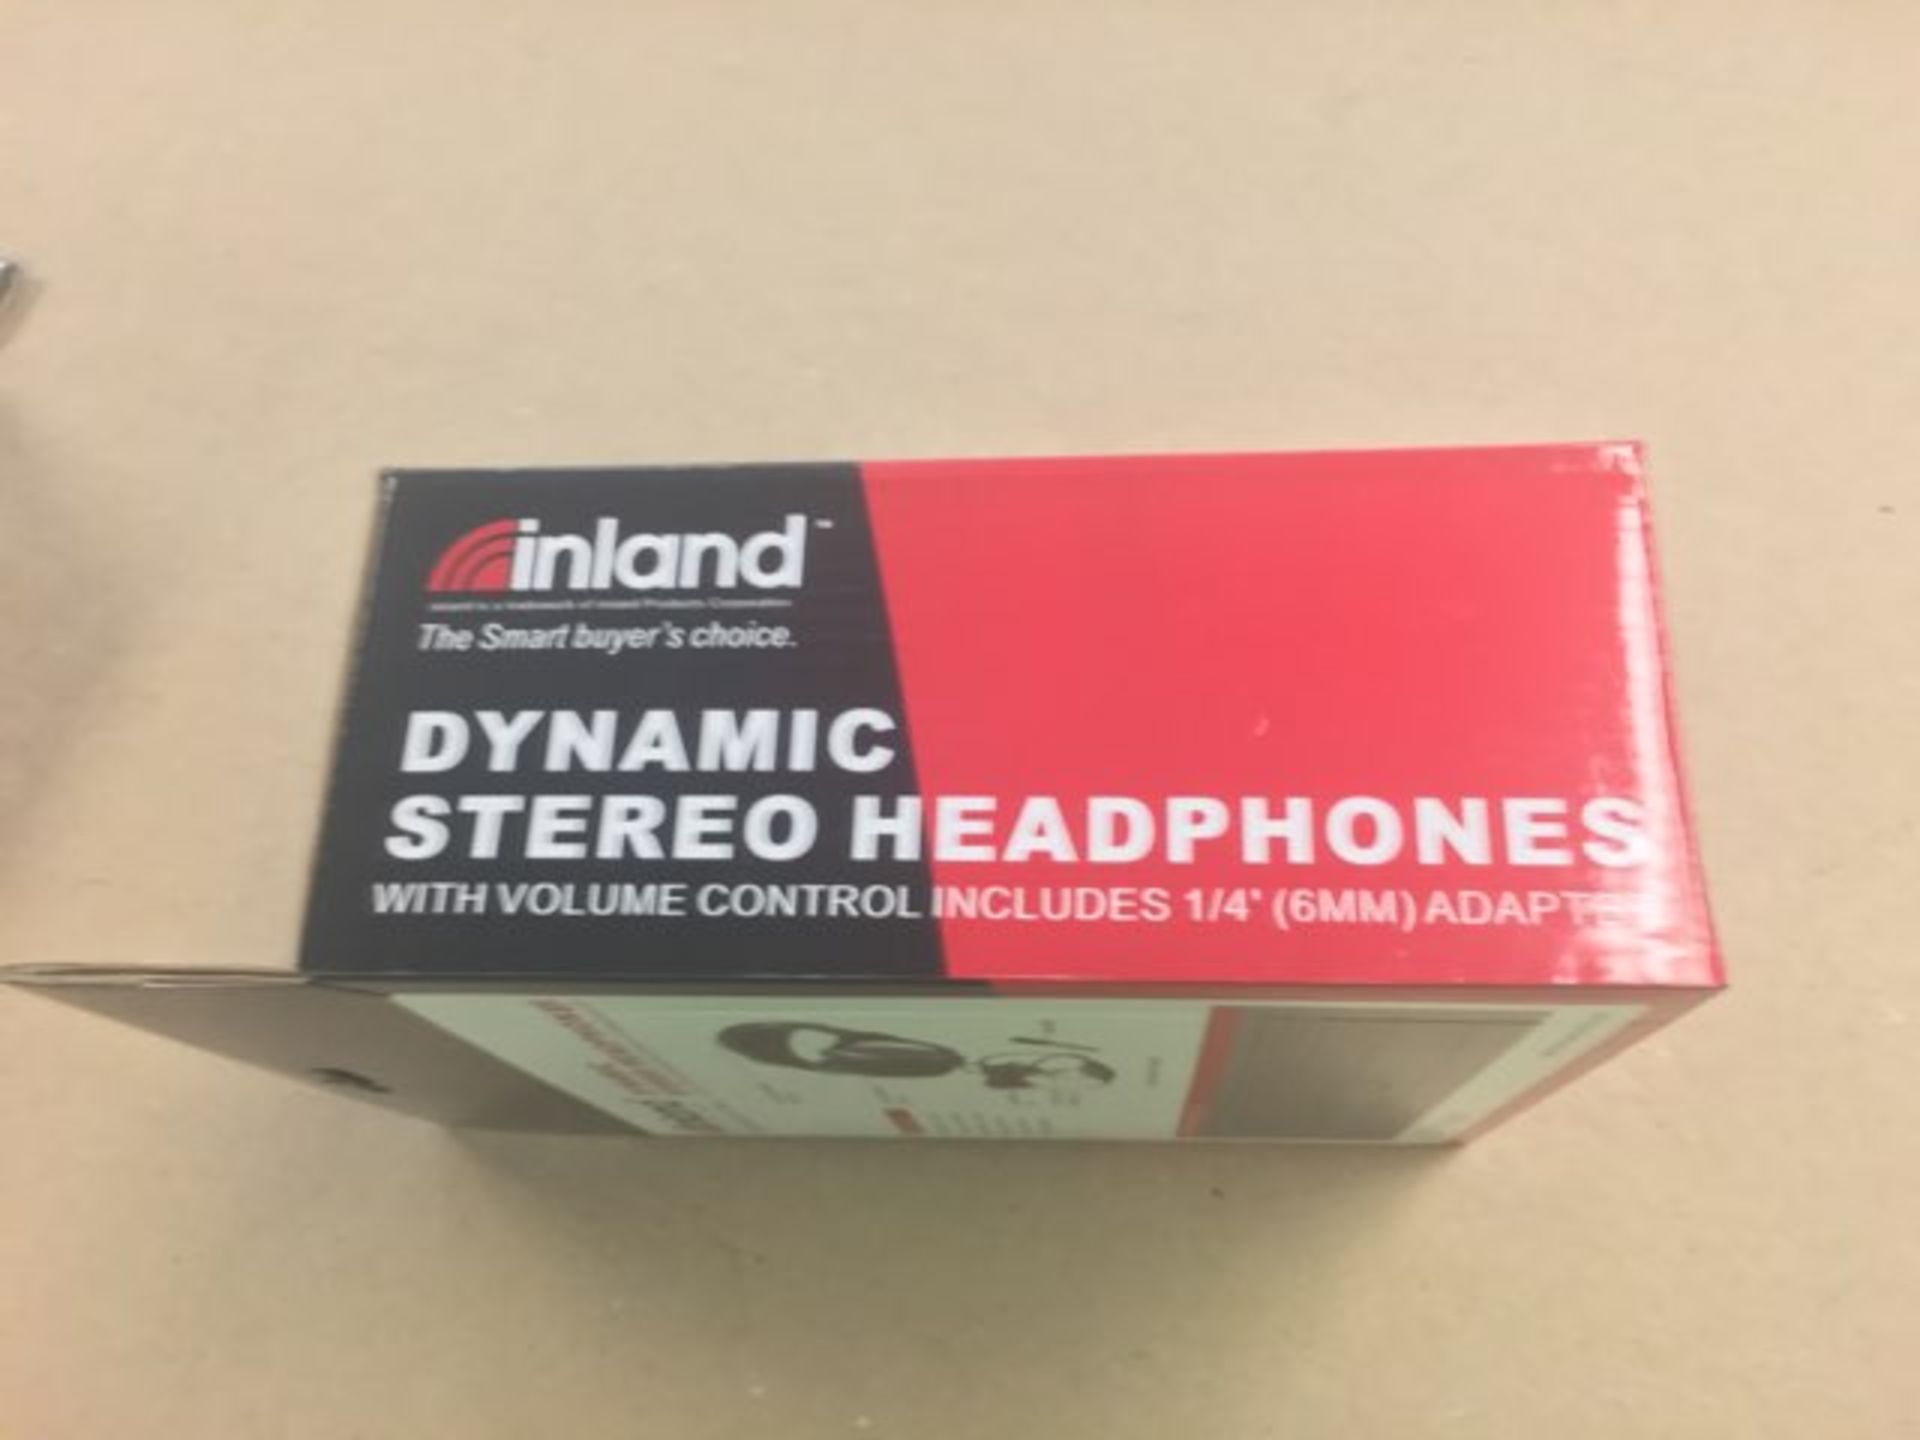 Inland Dynamic Stereo Headphones - Image 2 of 2